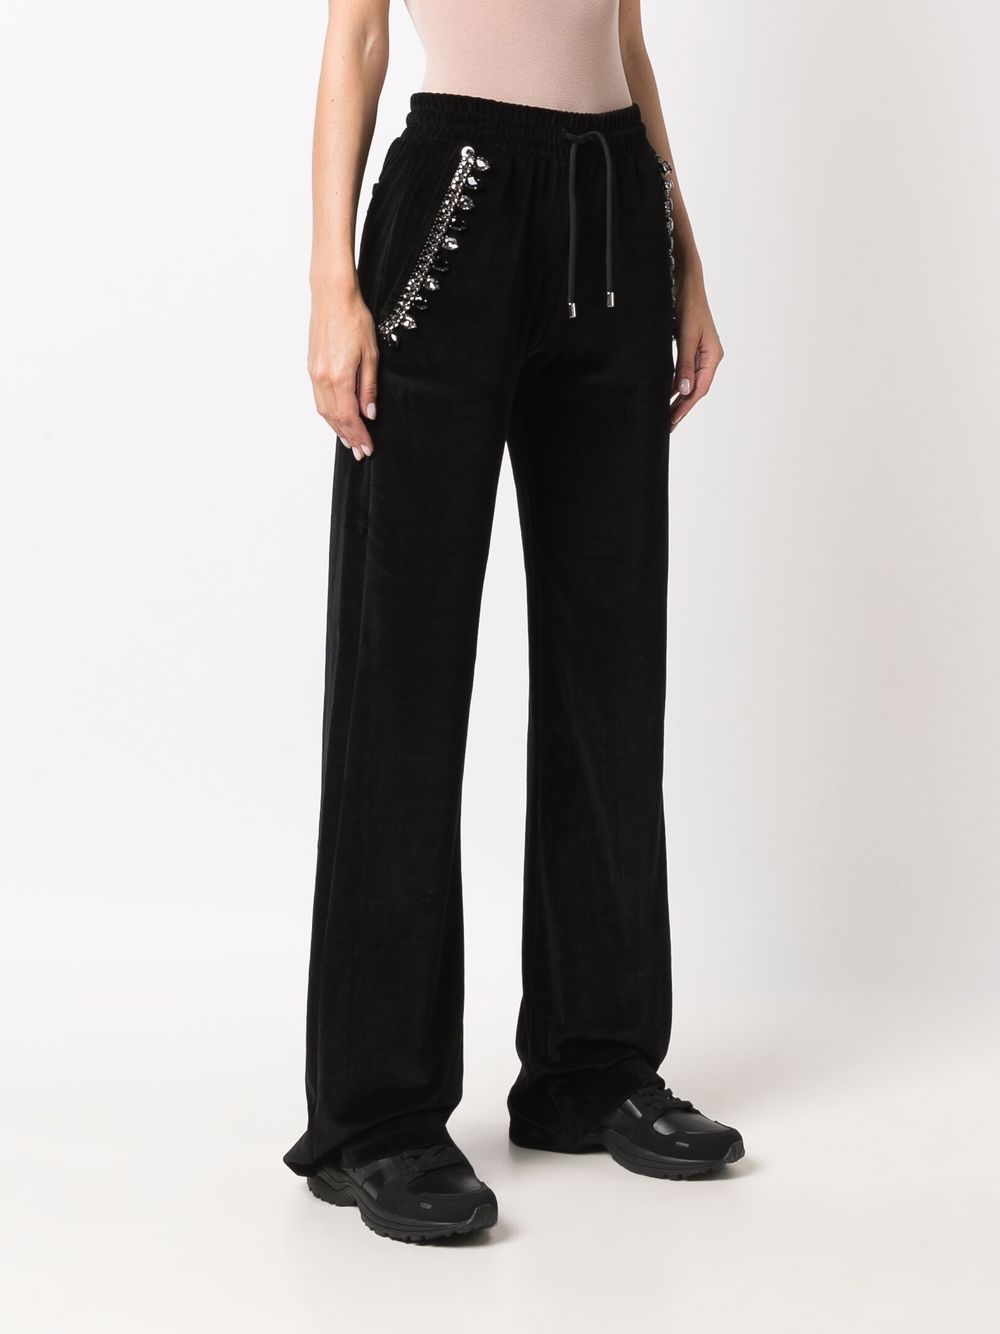 Shop Philipp Plein crystal cable detail velvet track pants with Express ...